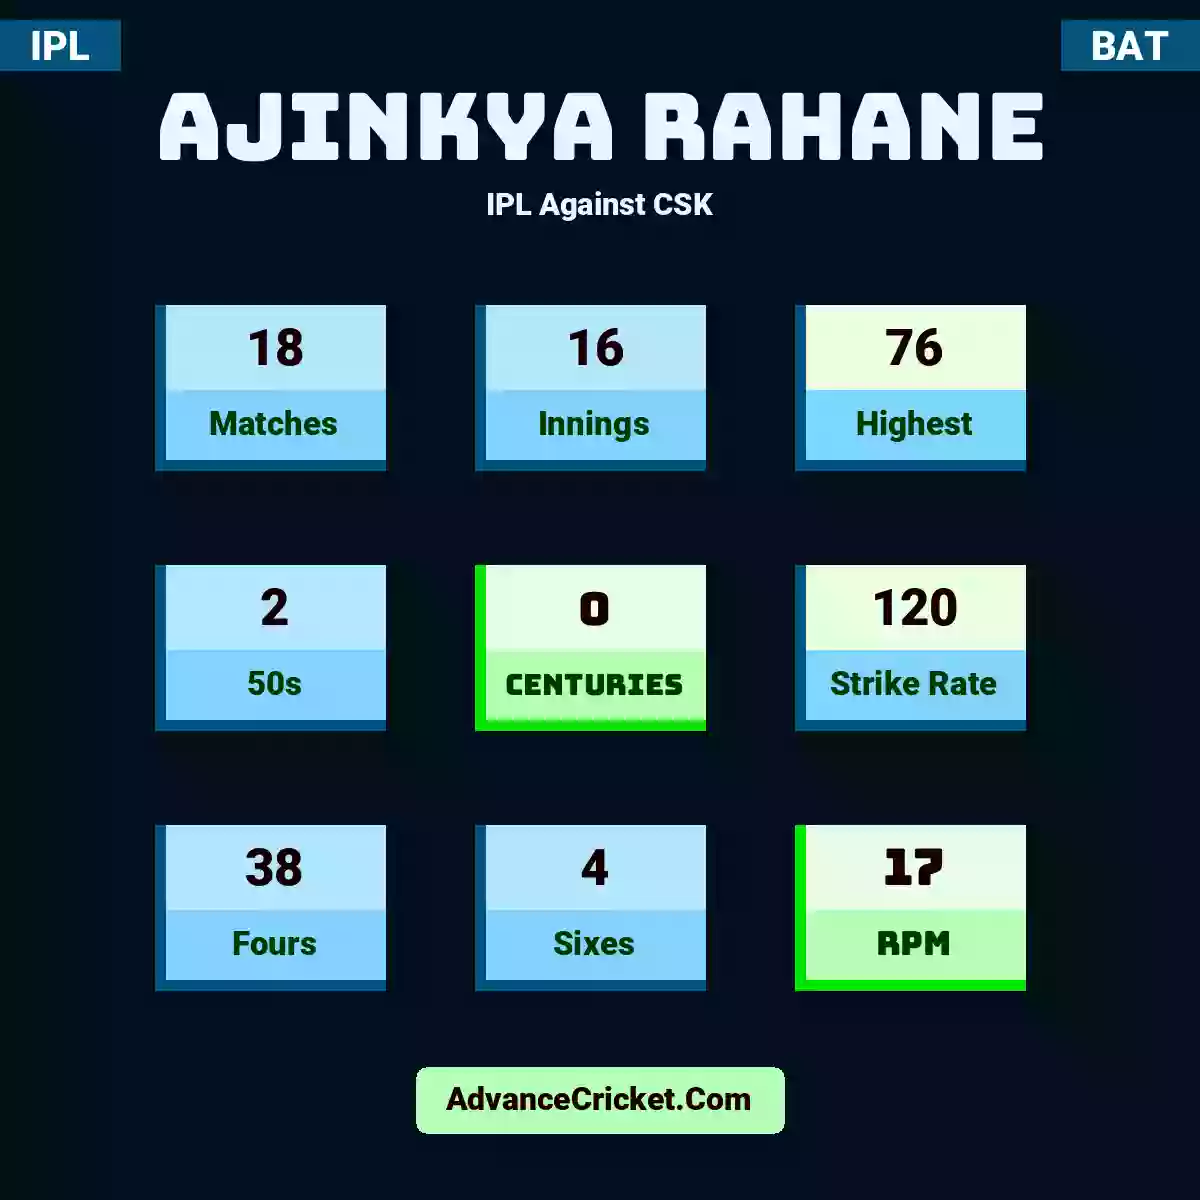 Ajinkya Rahane IPL  Against CSK, Ajinkya Rahane played 18 matches, scored 76 runs as highest, 2 half-centuries, and 0 centuries, with a strike rate of 120. A.Rahane hit 38 fours and 4 sixes, with an RPM of 17.